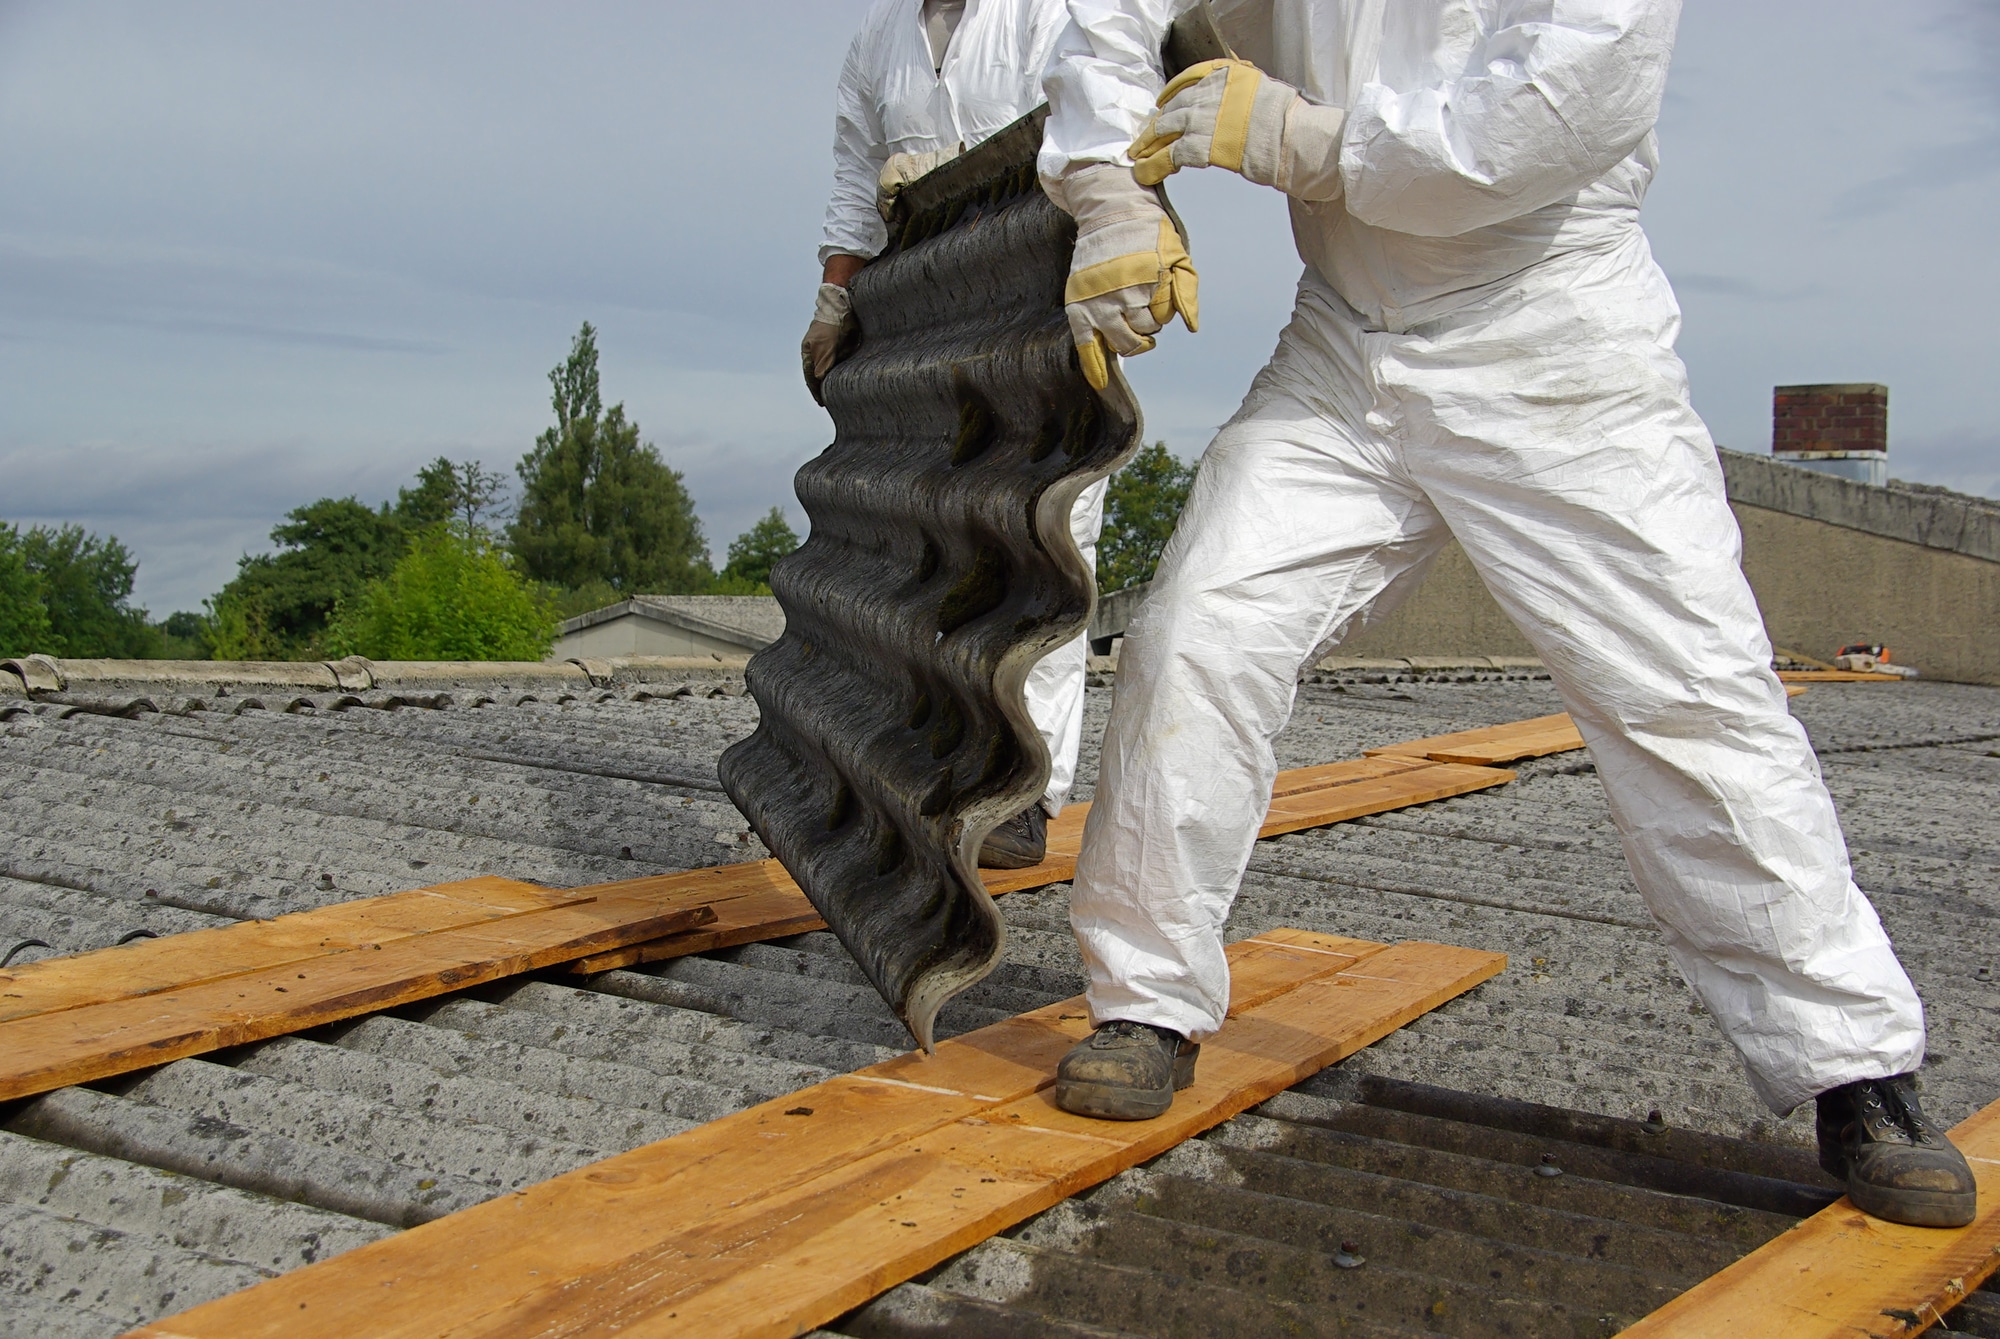 Two men standing on wooden planks carrying asbestos